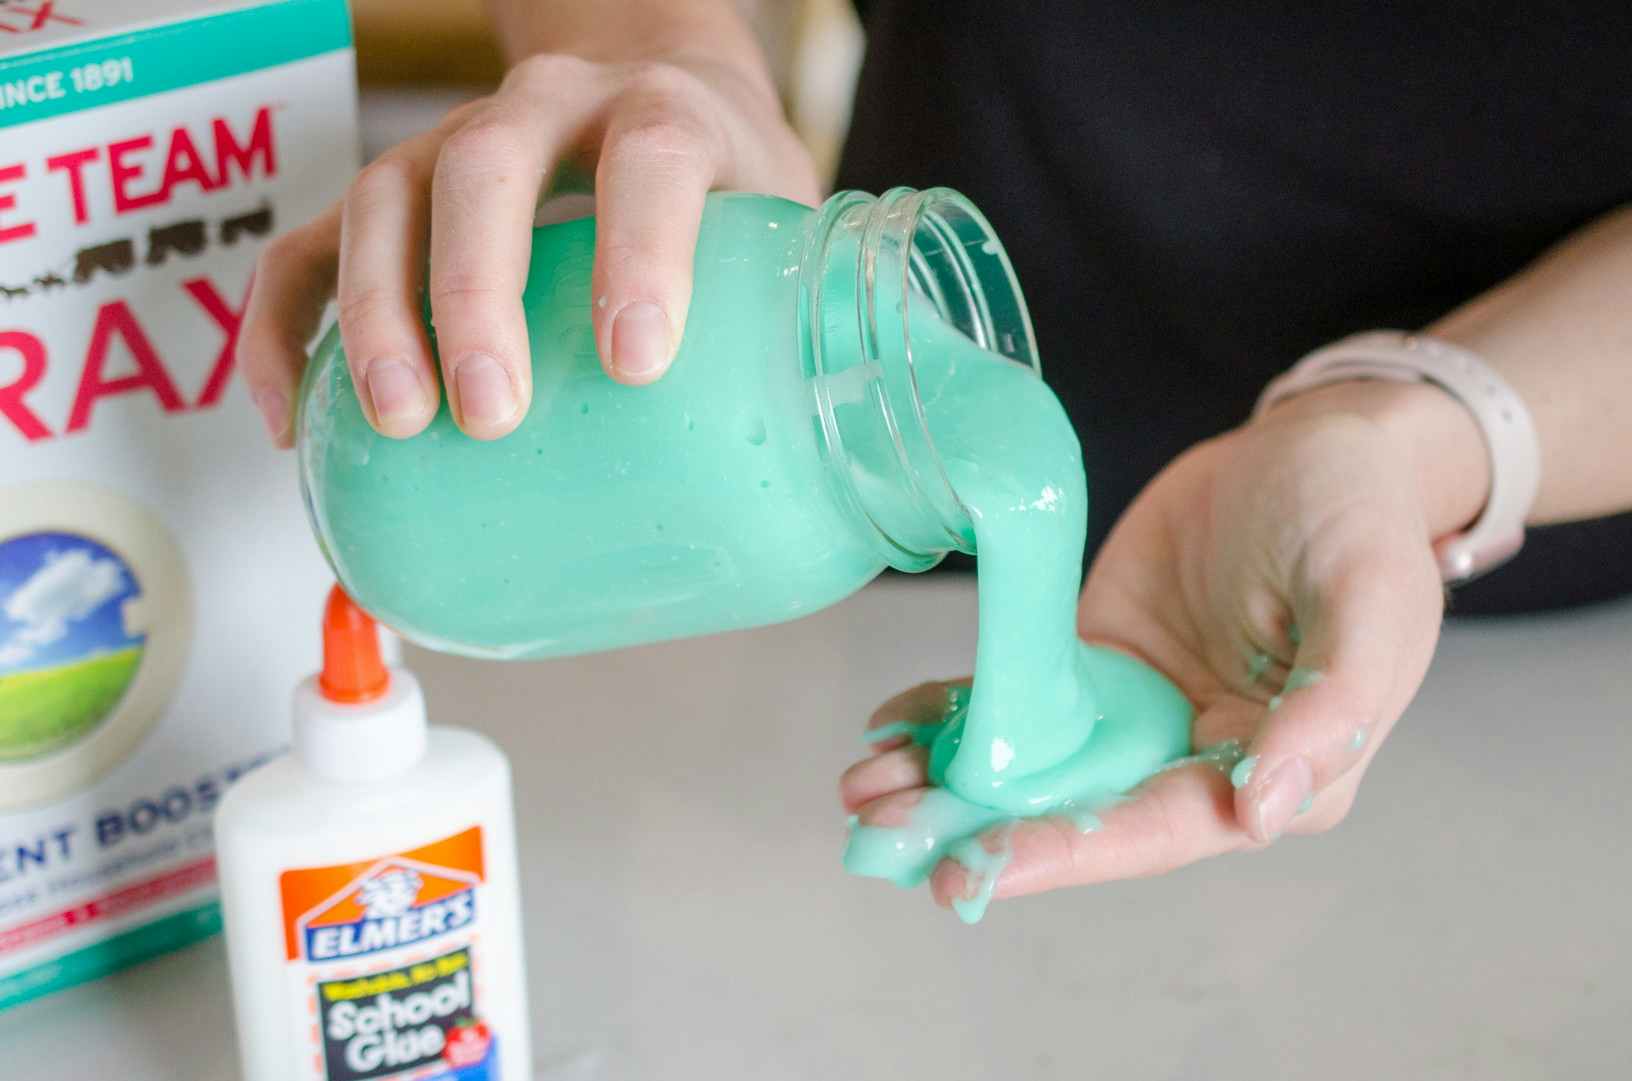 Woman pouring homemade slime into her hand.